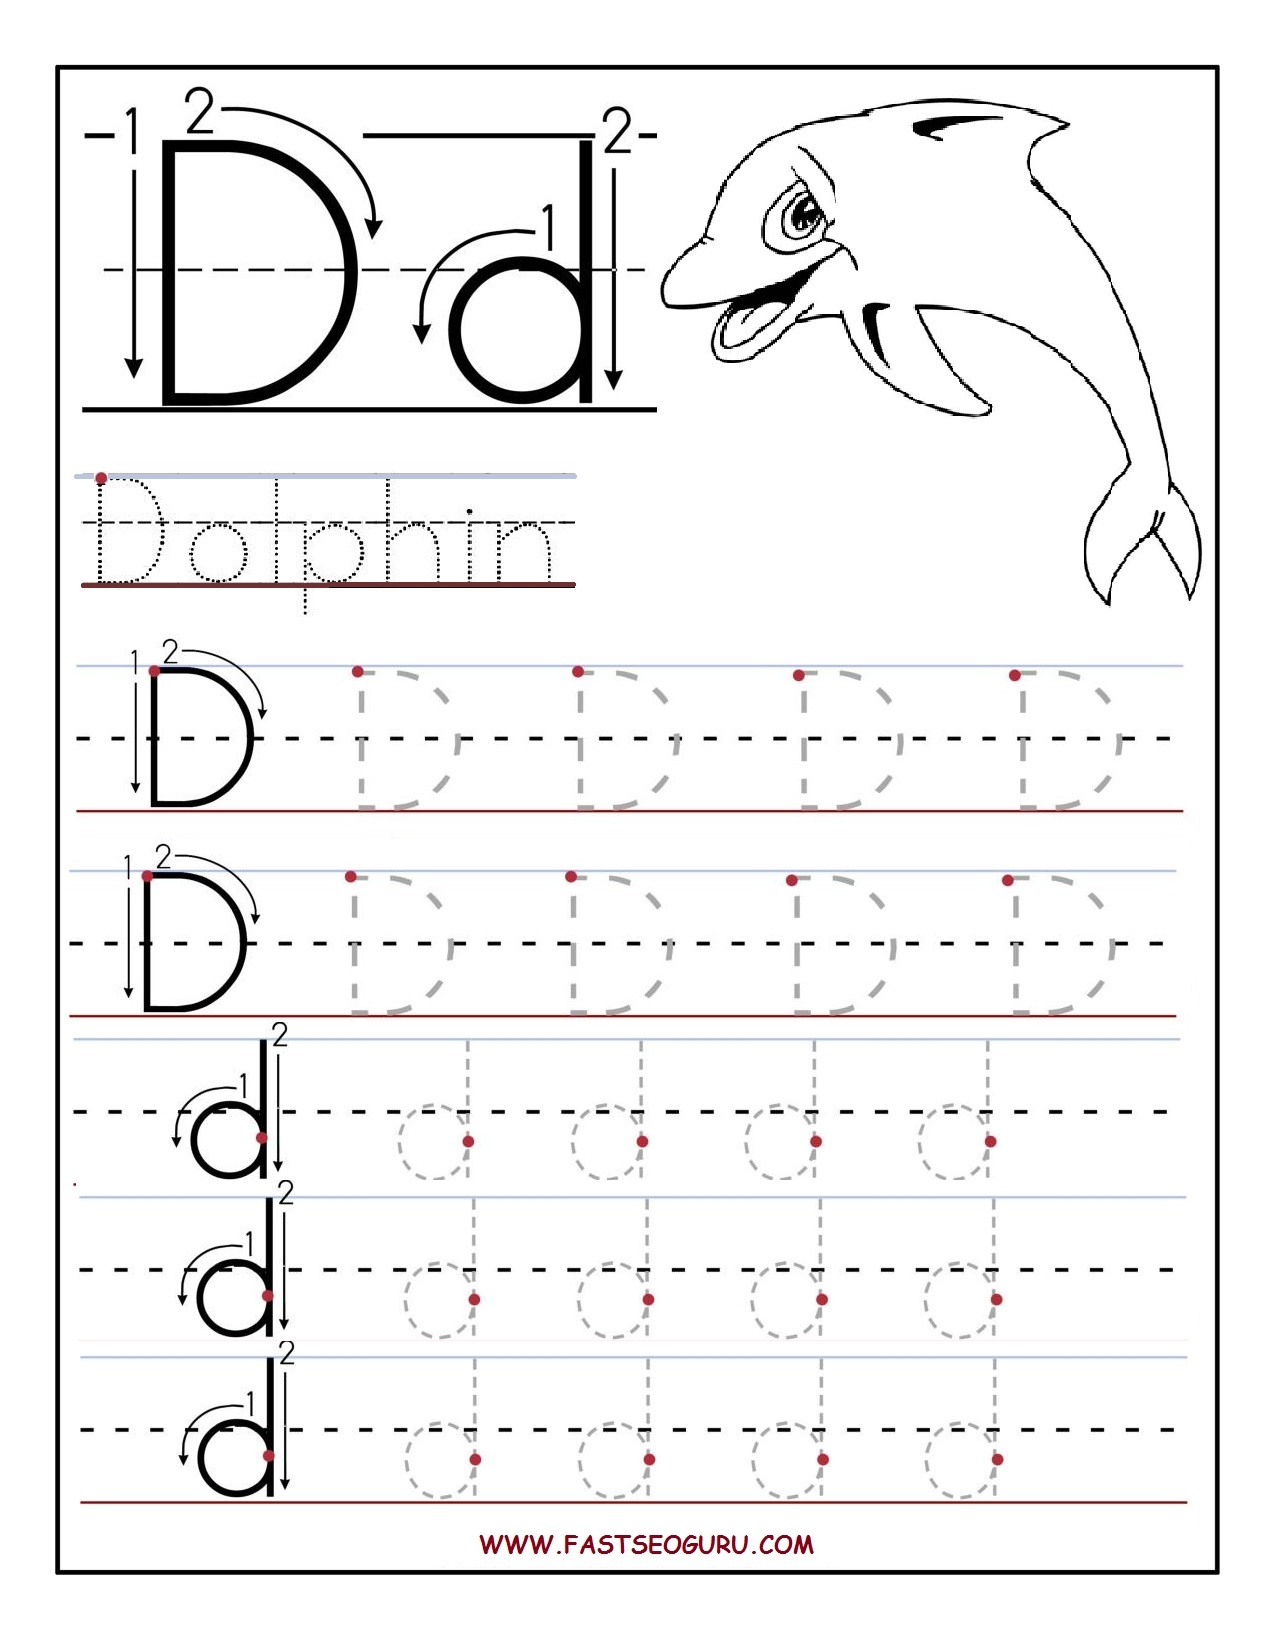 Free Letter Tracing Worksheets For Preschool